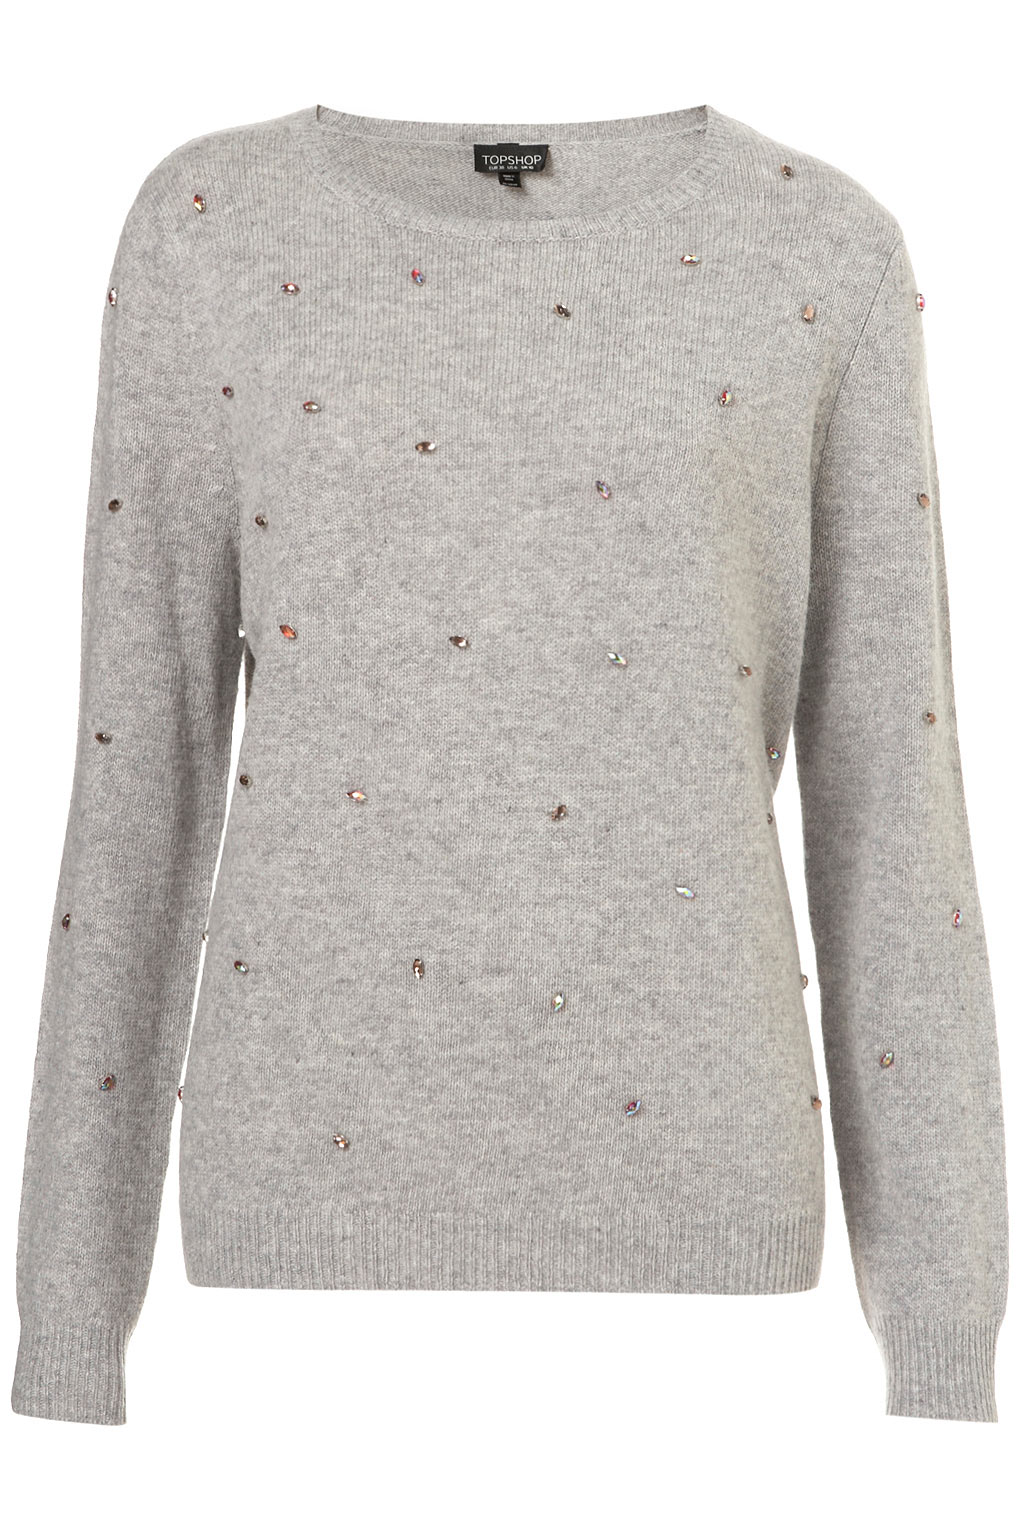 Lyst Topshop Knitted Crystal Sweater In Gray